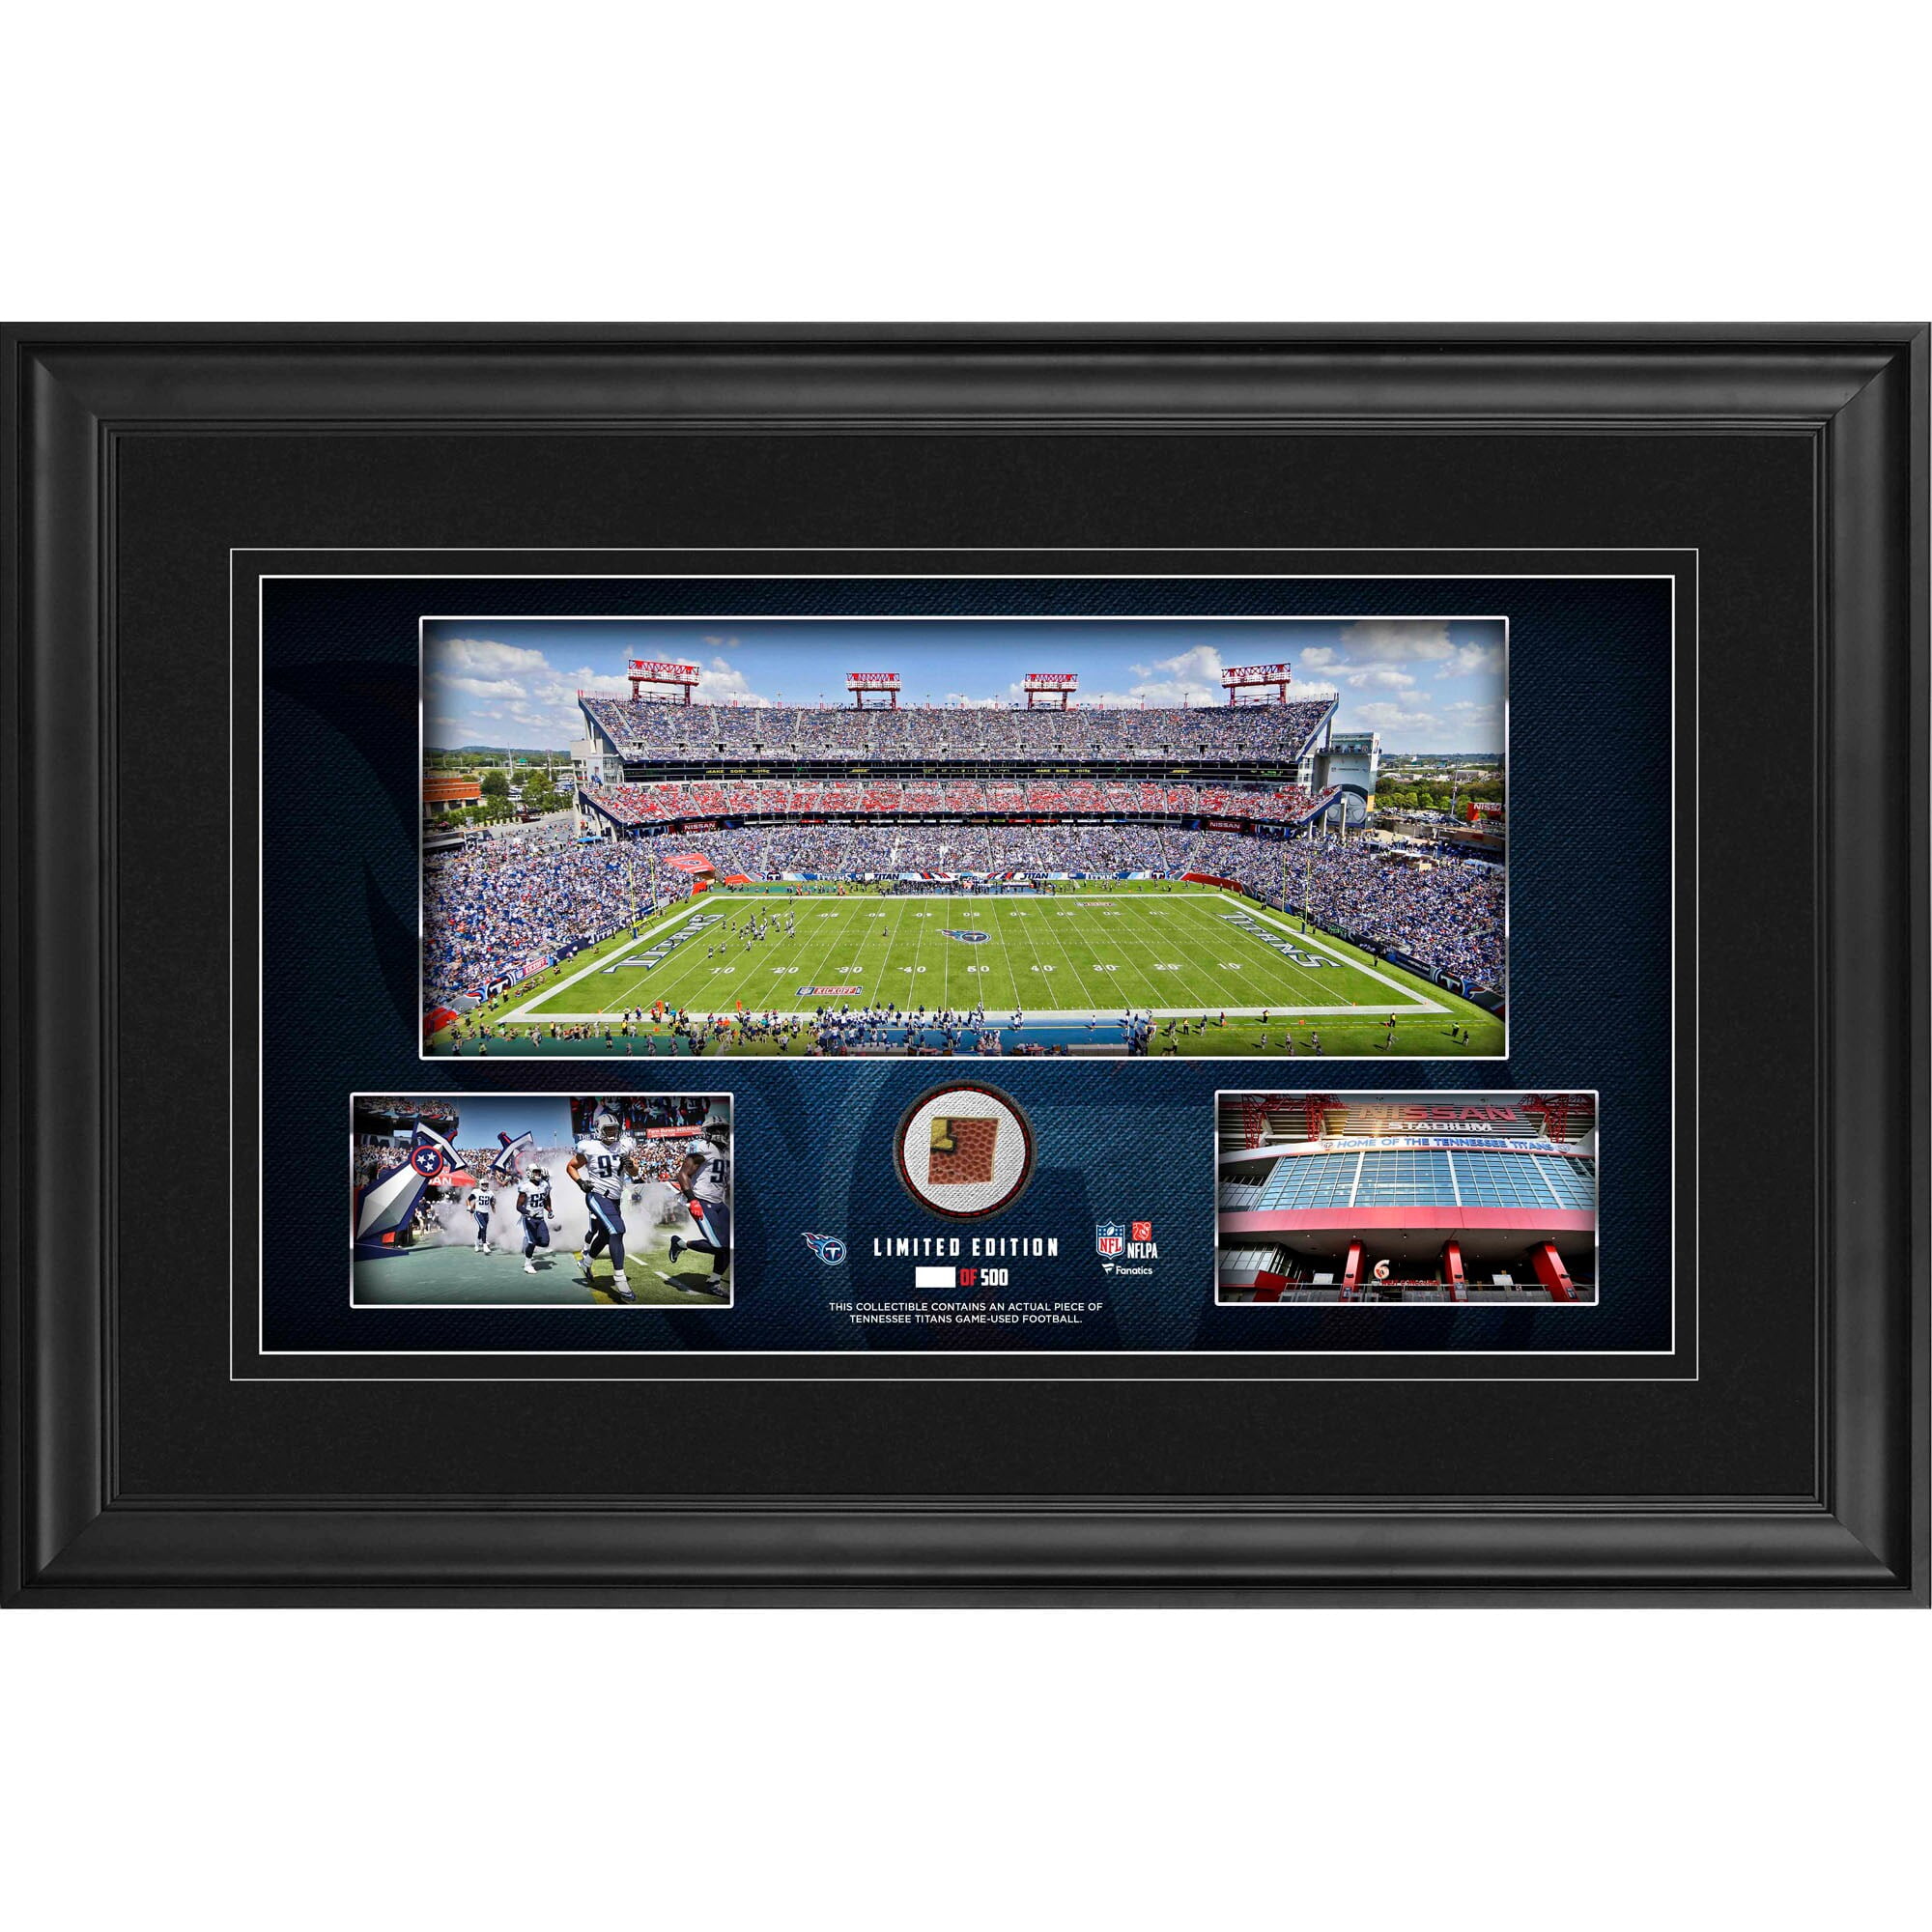 Tennessee Titans Framed 10' x 18' Stadium Panoramic Collage with Game-Used  Football - Limited Edition of 500 